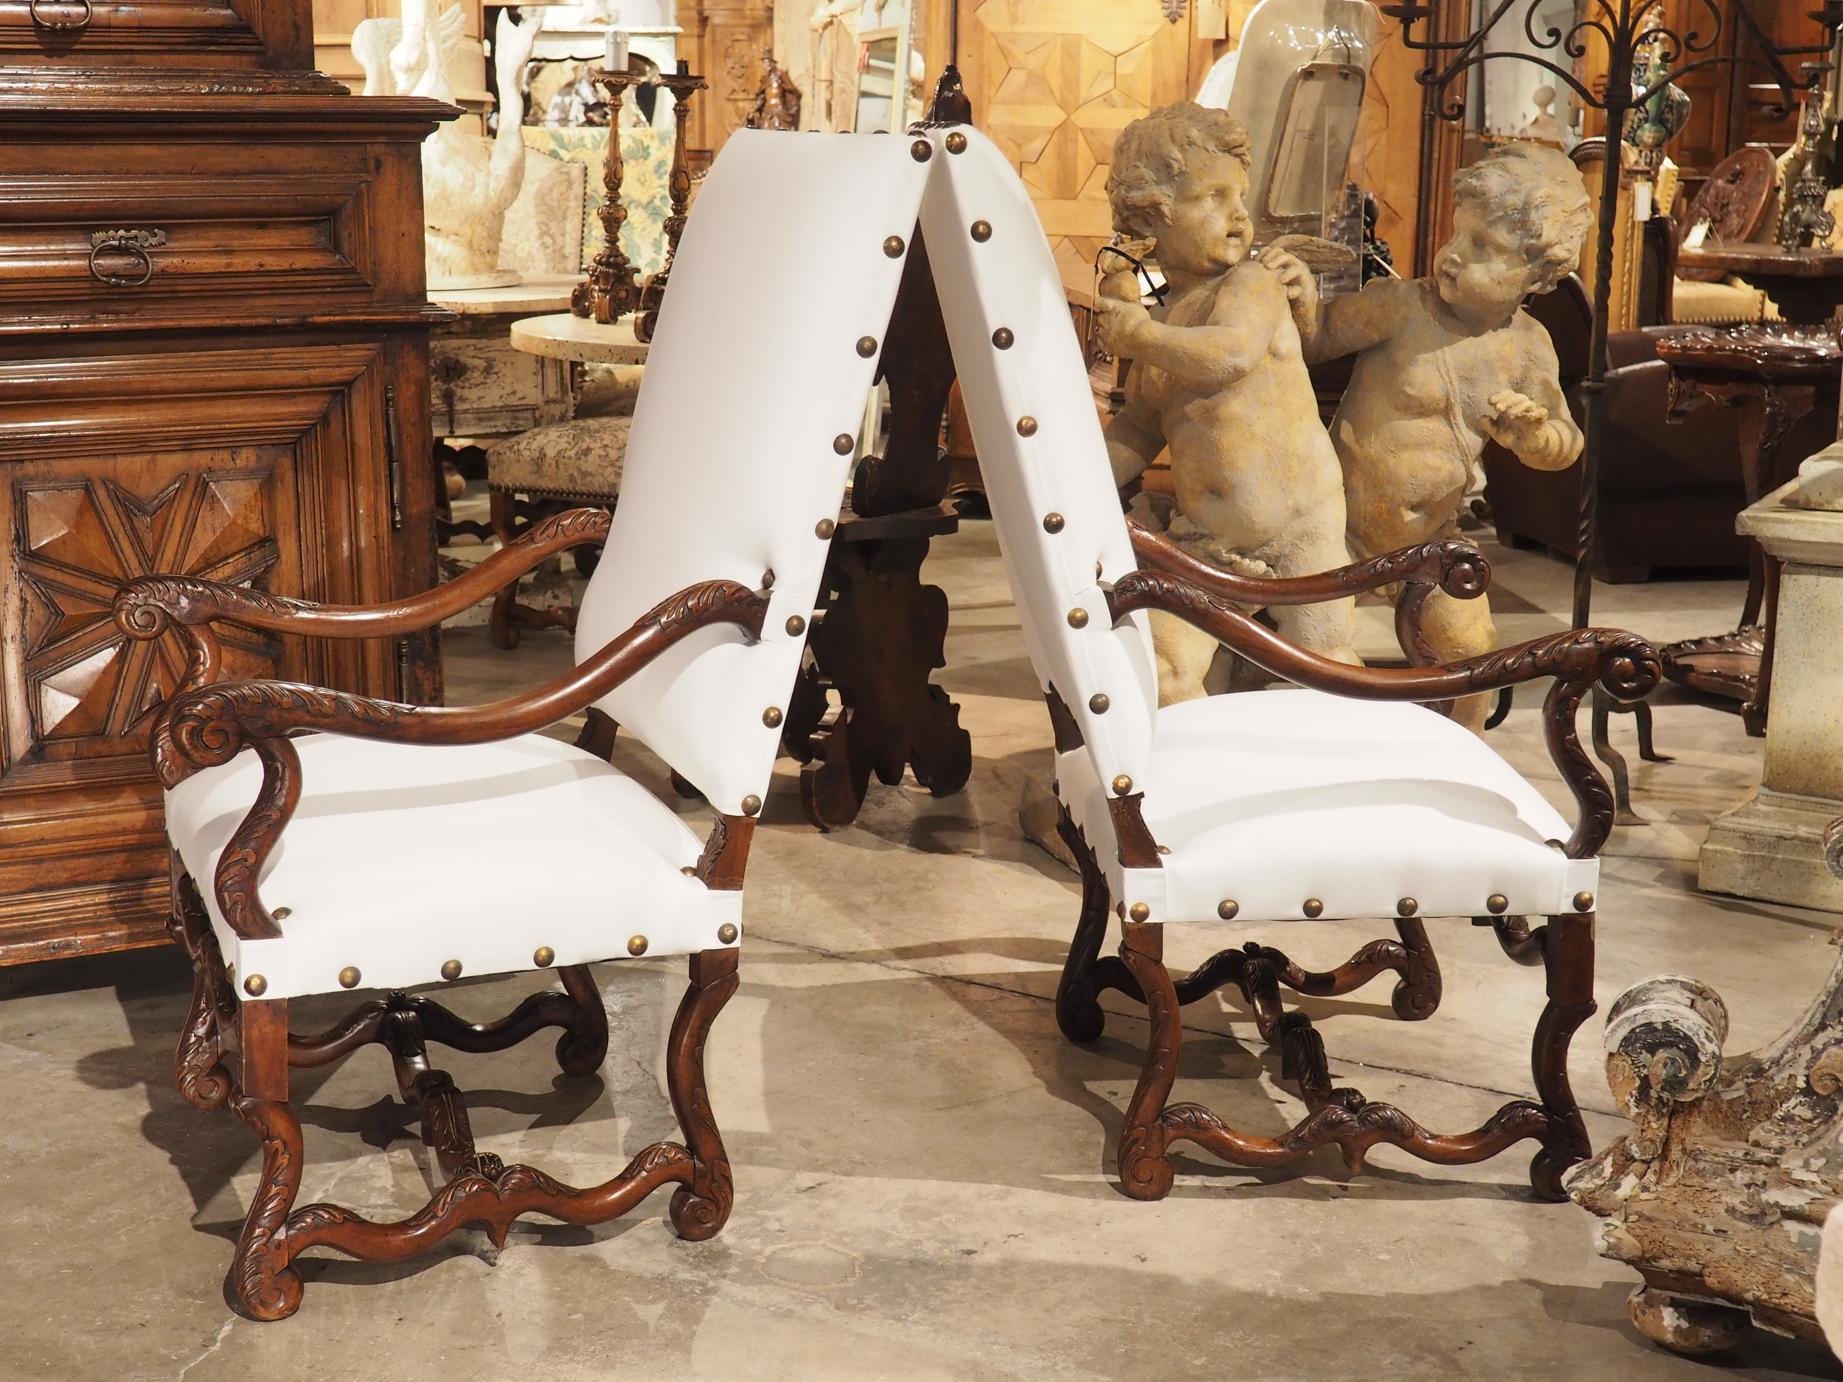 French Louis XVI Gilt Wood Parlor Chairs- Pair